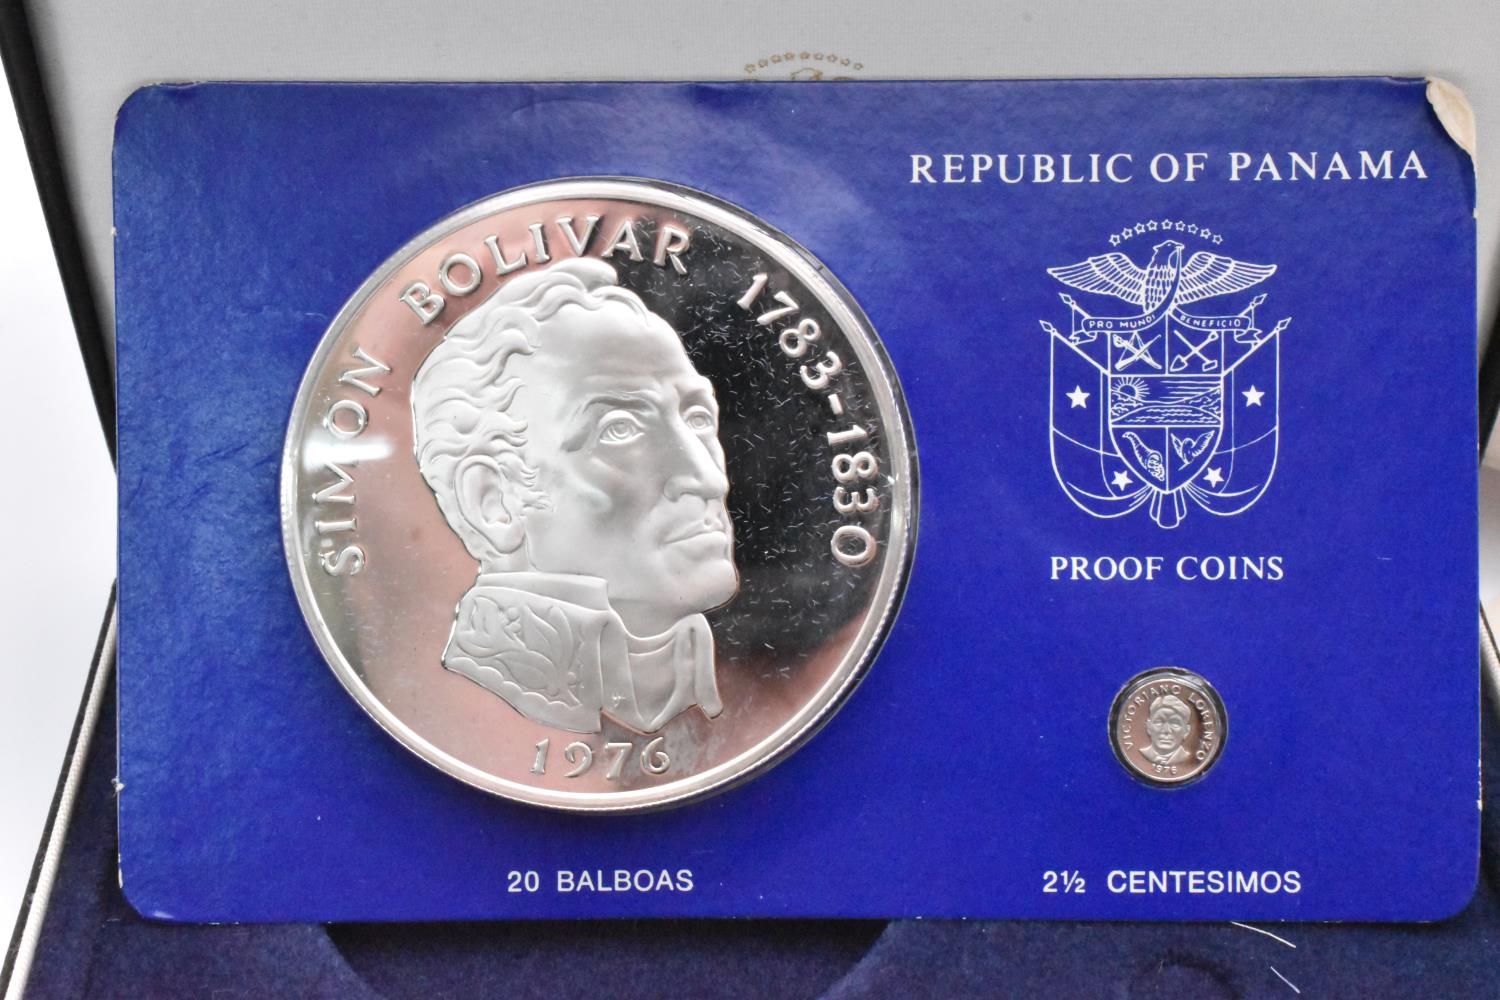 Republic of Panama - 1976 Coinage of Panama, comprising of Silver 20 Balboas depicting the - Image 2 of 3